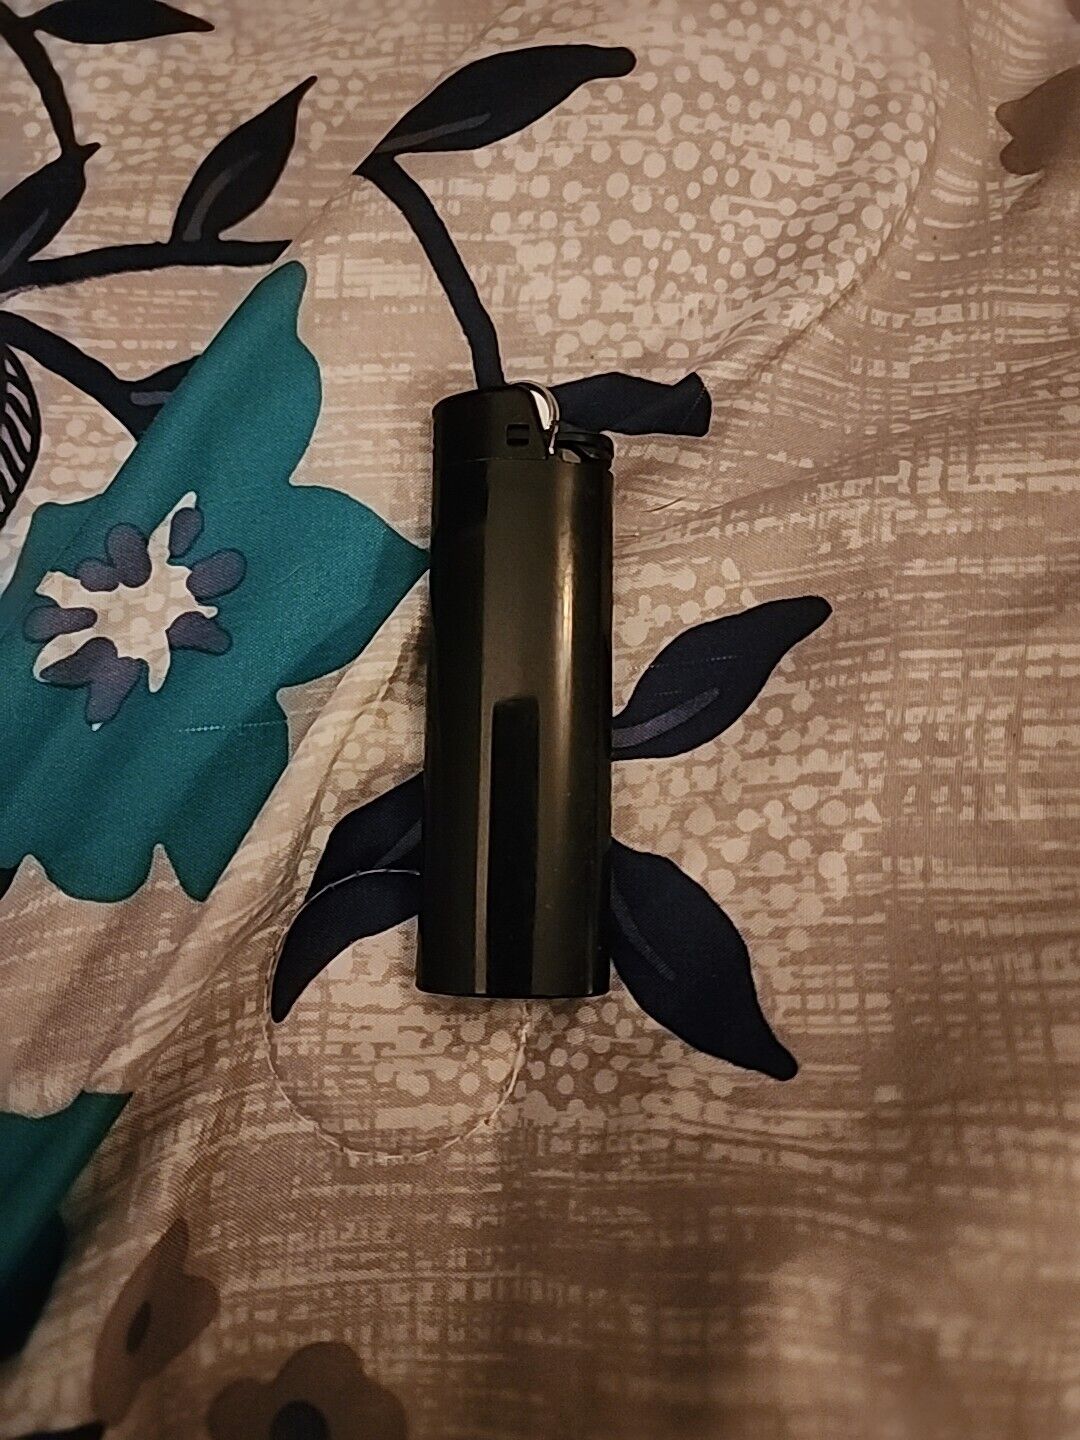 Limited Edition All Black BIC Collectable Lighter Brand New